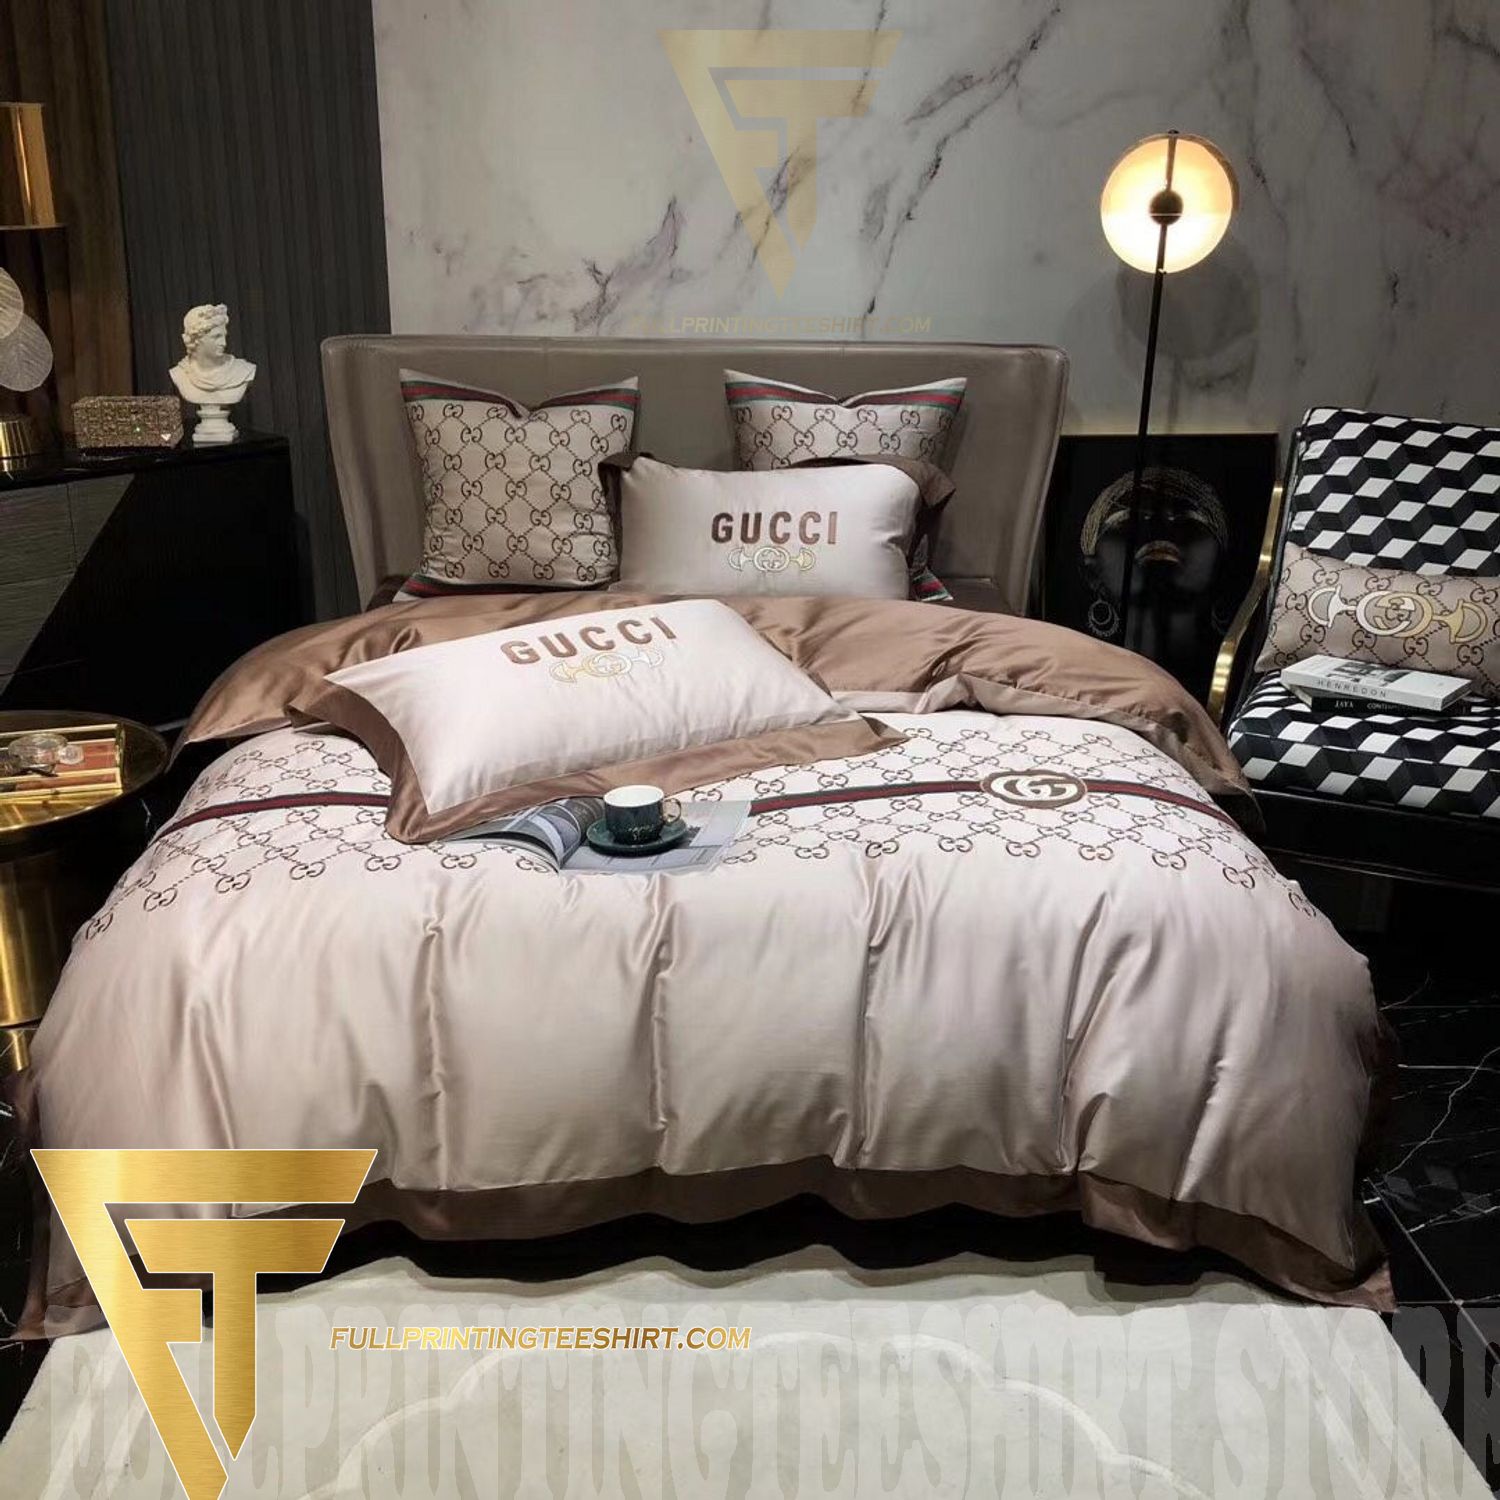 Top-selling item] Gucci Type 108 Luxury Brand Home Decor Duvet Cover  Bedroom Sets